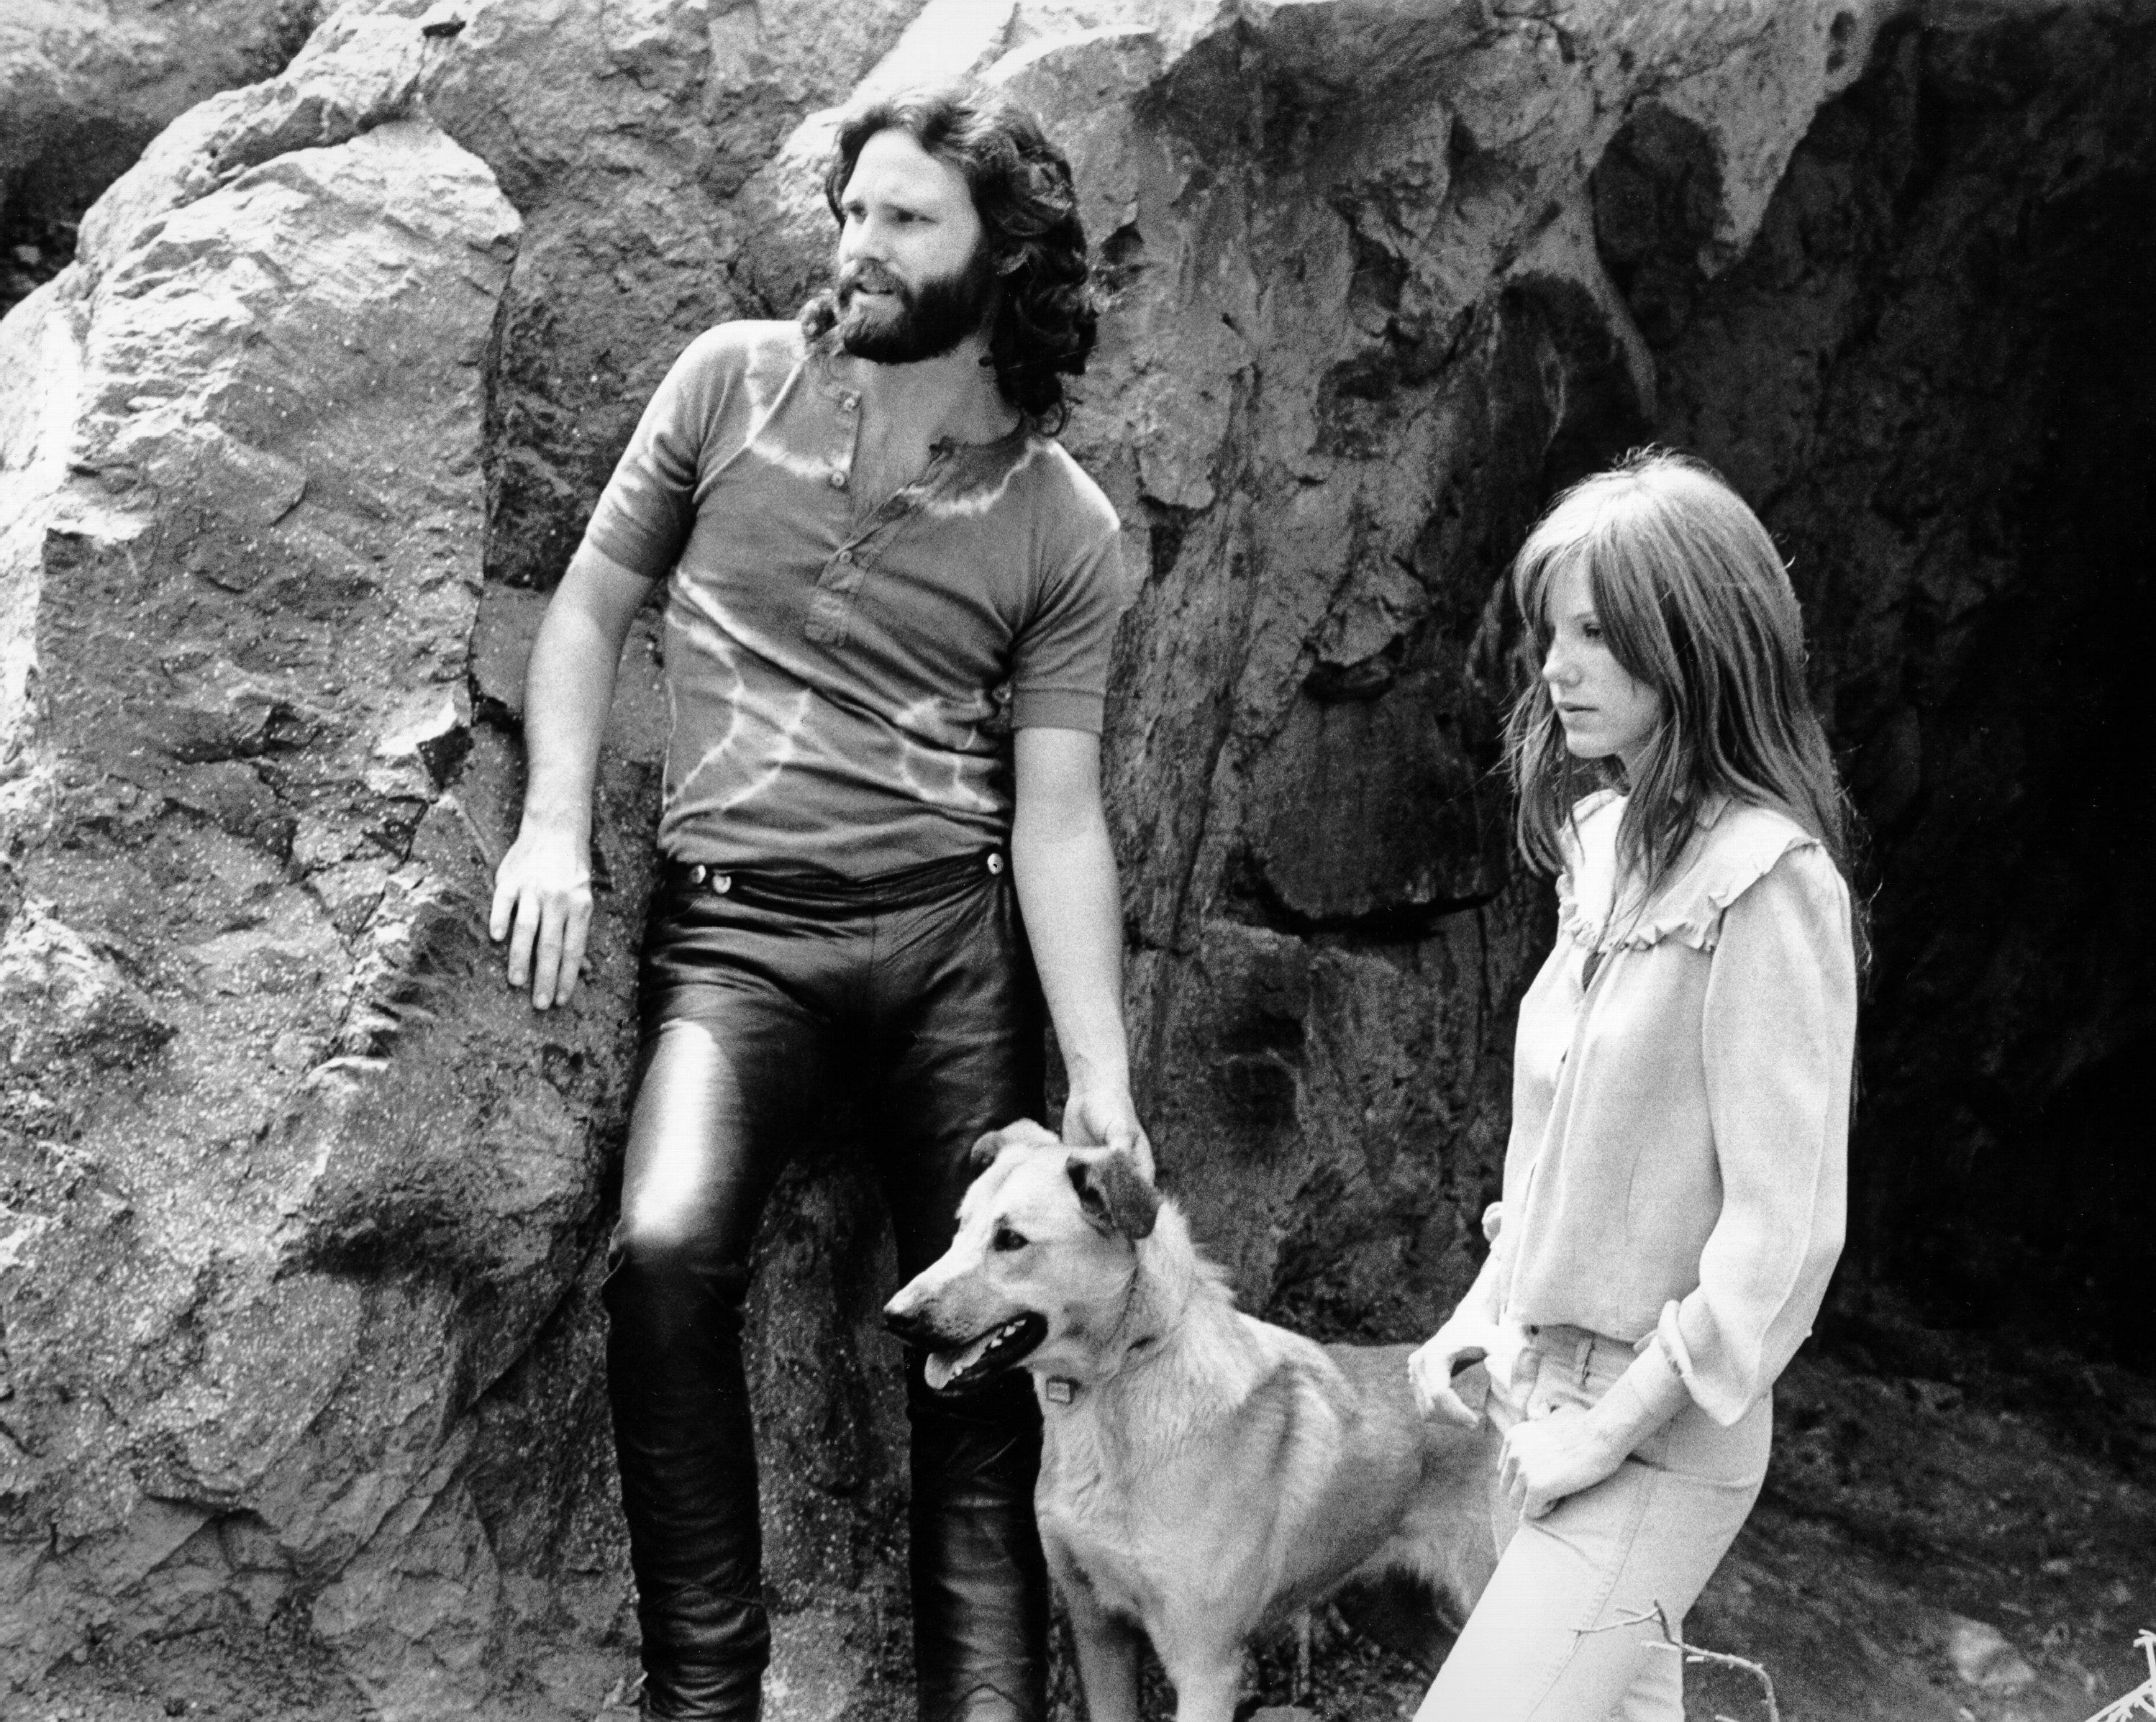 Singer Jim Morrison of The Doors with girlfriend Pamela Courson during a 1969 photo shoot at Bronson Caves in the Hollywood Hills, California. | Source: Getty Images